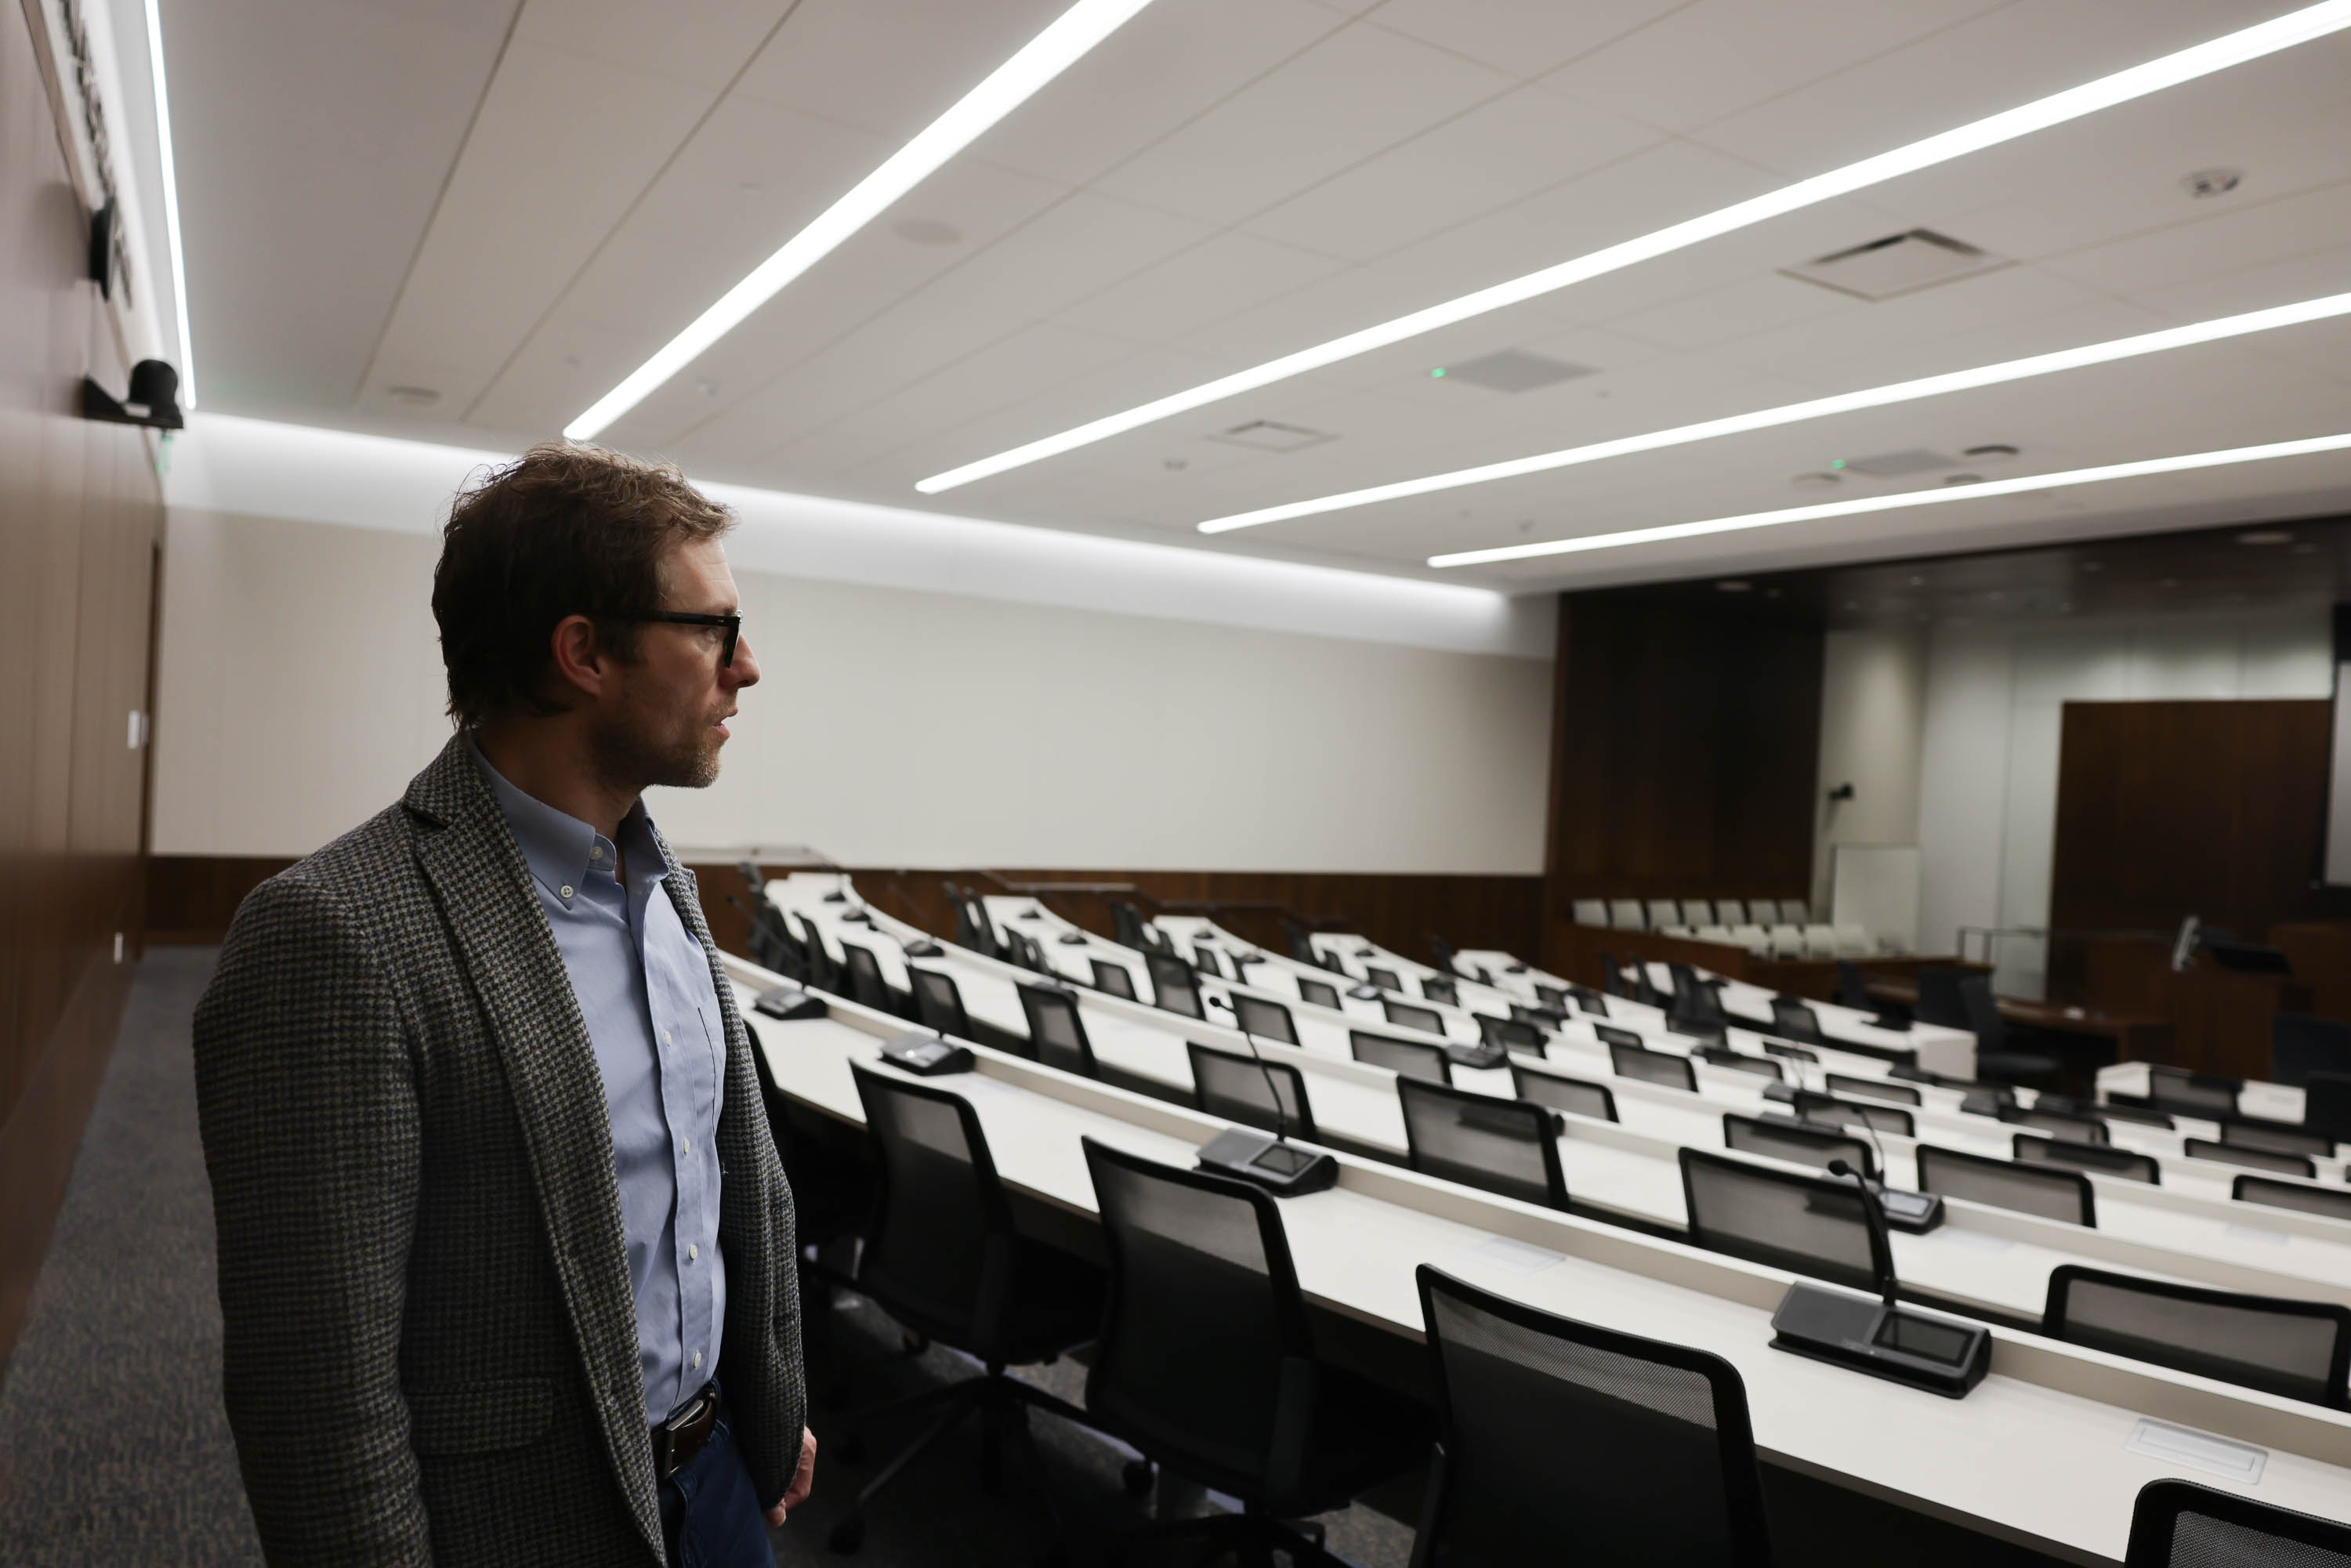 A man in a blazer stands in an empty, modern lecture hall with rows of seats and desks.